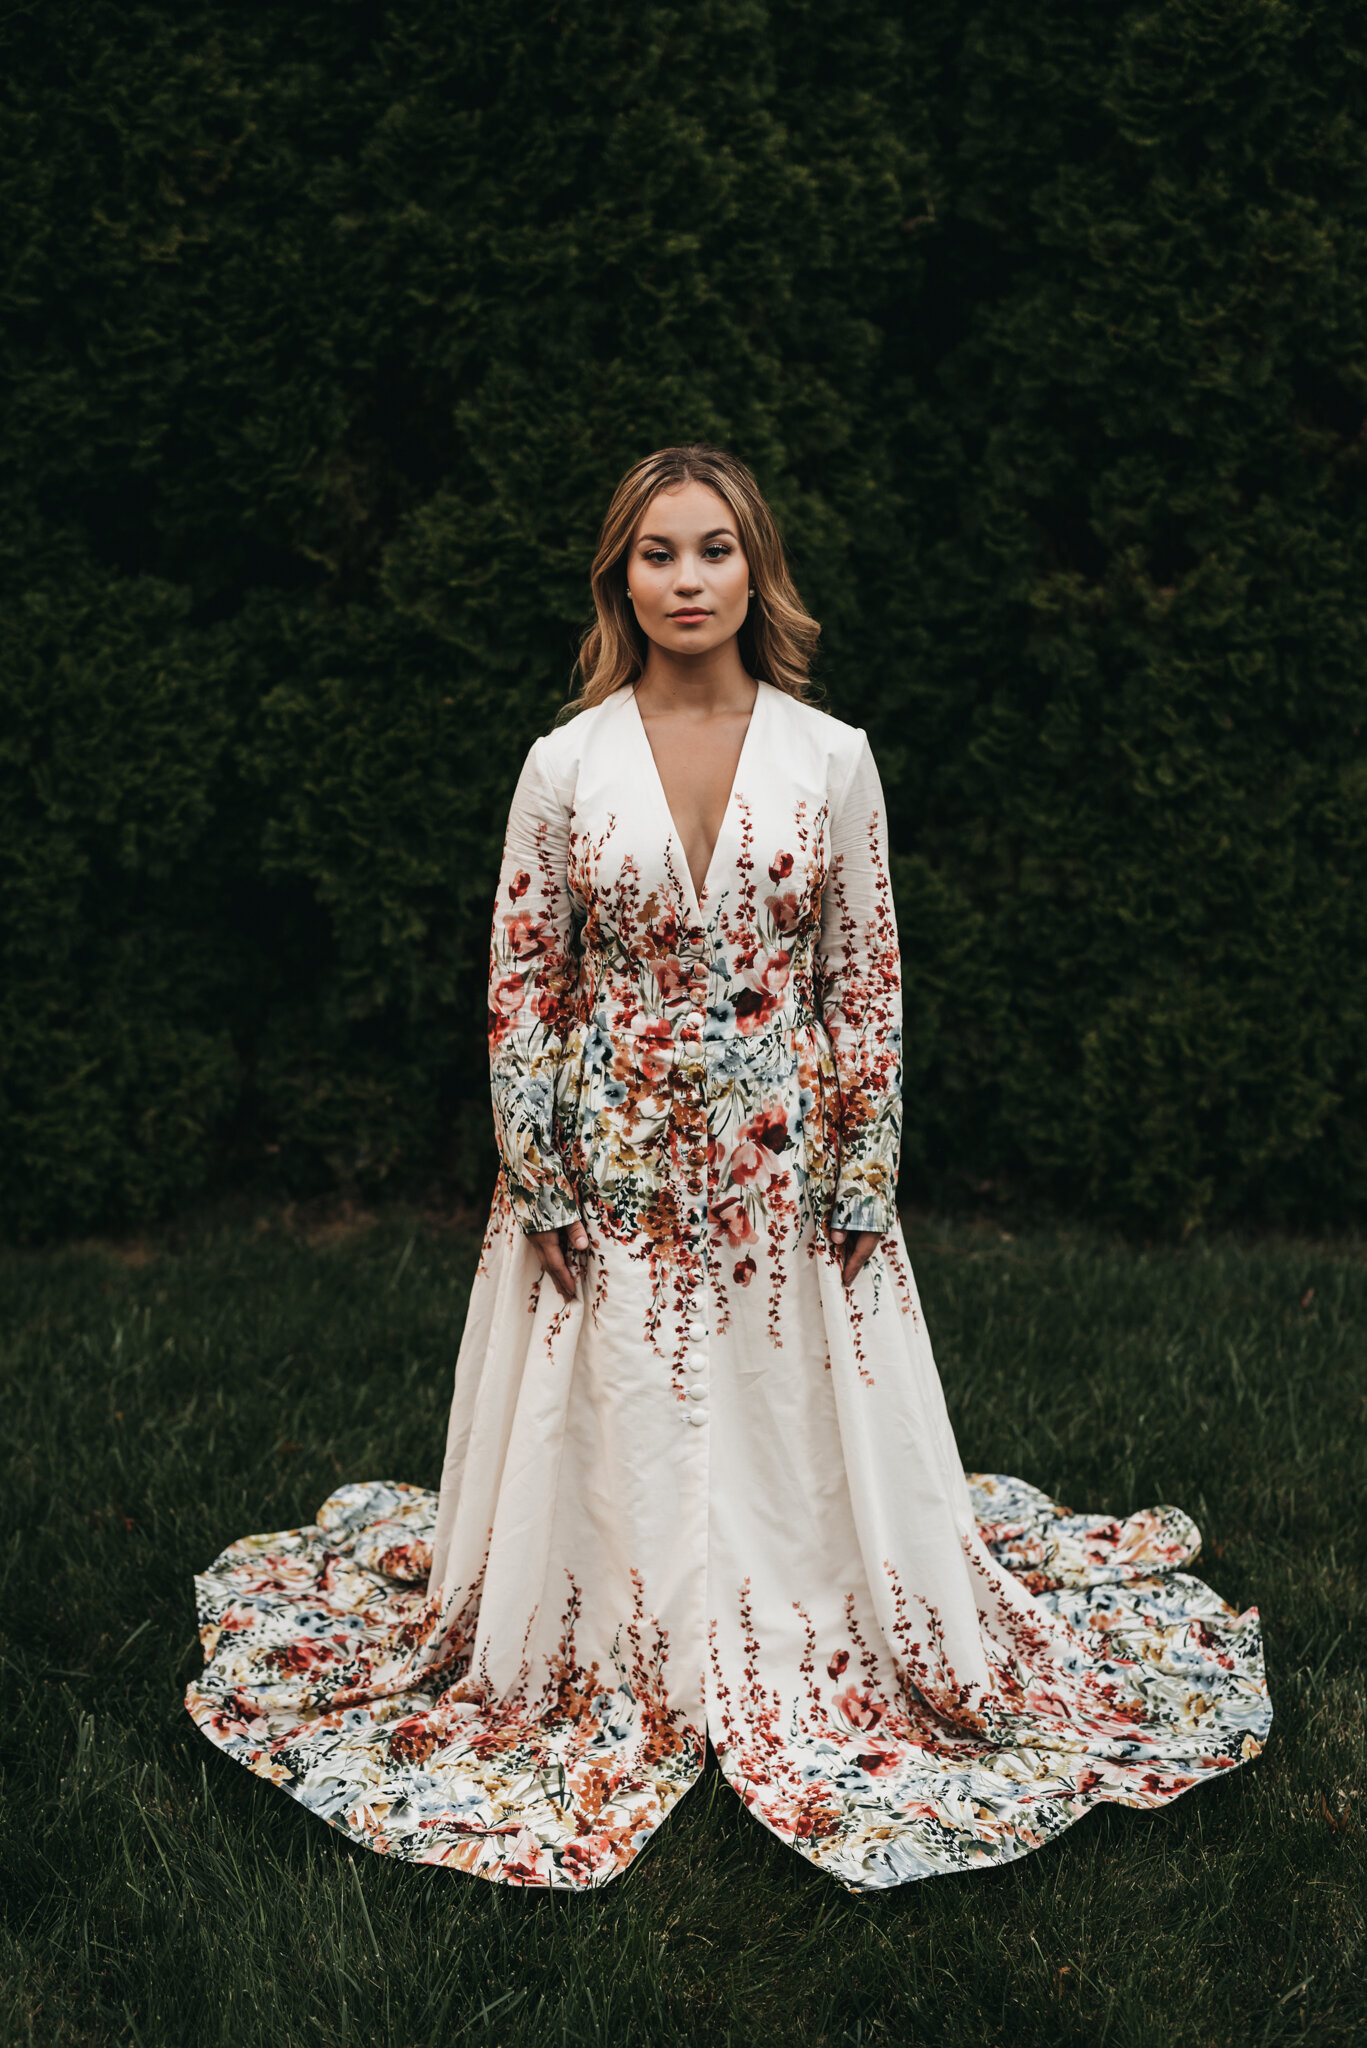 21 of the Best Coats & Coat Dresses for Weddings - hitched.co.uk -  hitched.co.uk